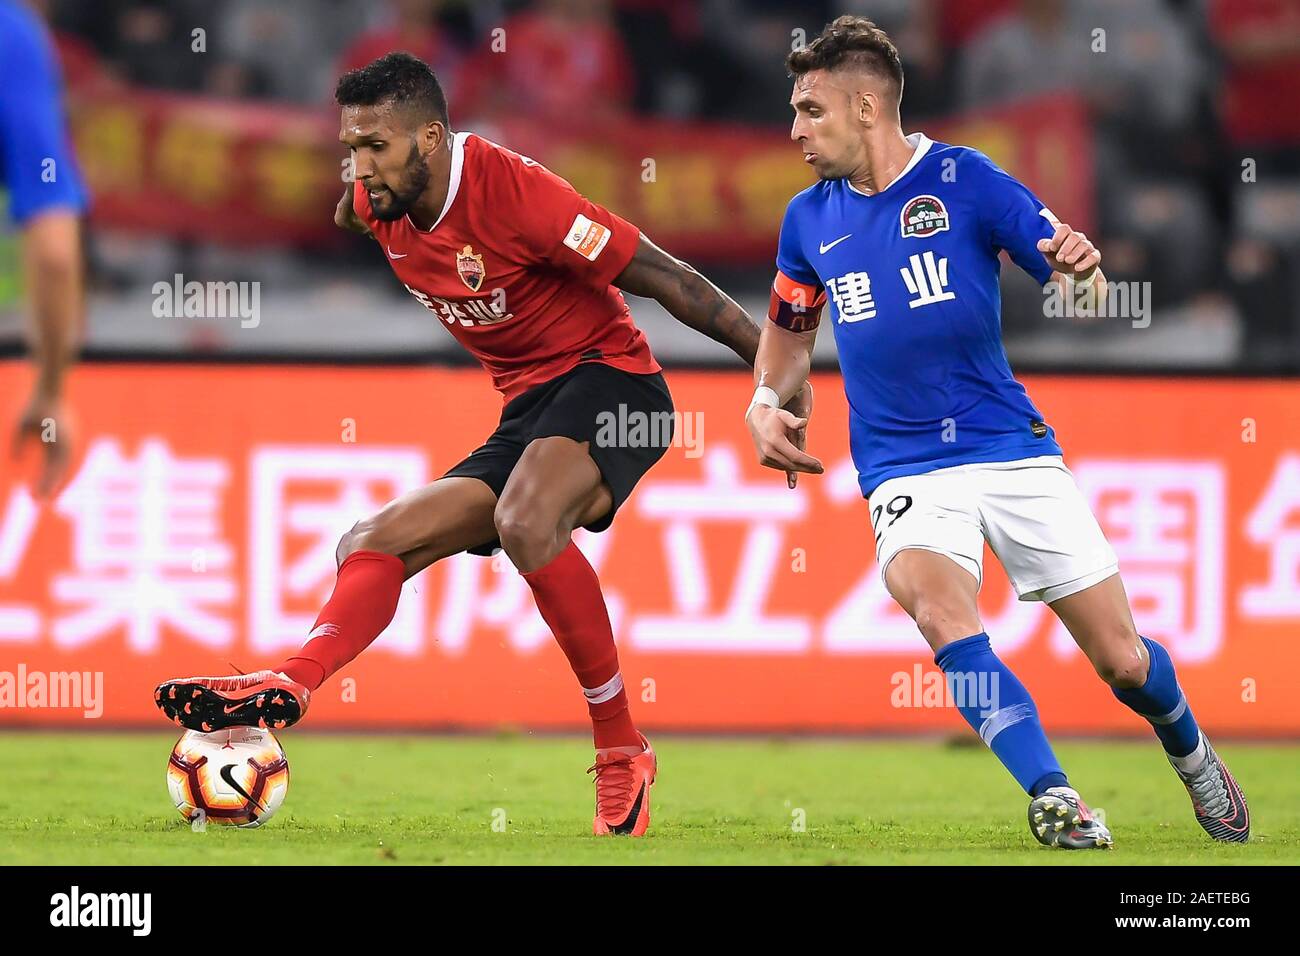 Brazilian-born Portuguese football player Dyego Sousa of Shenzhen F.C., left, keeps the ball during the 29th round match of Chinese Football Associati Stock Photo